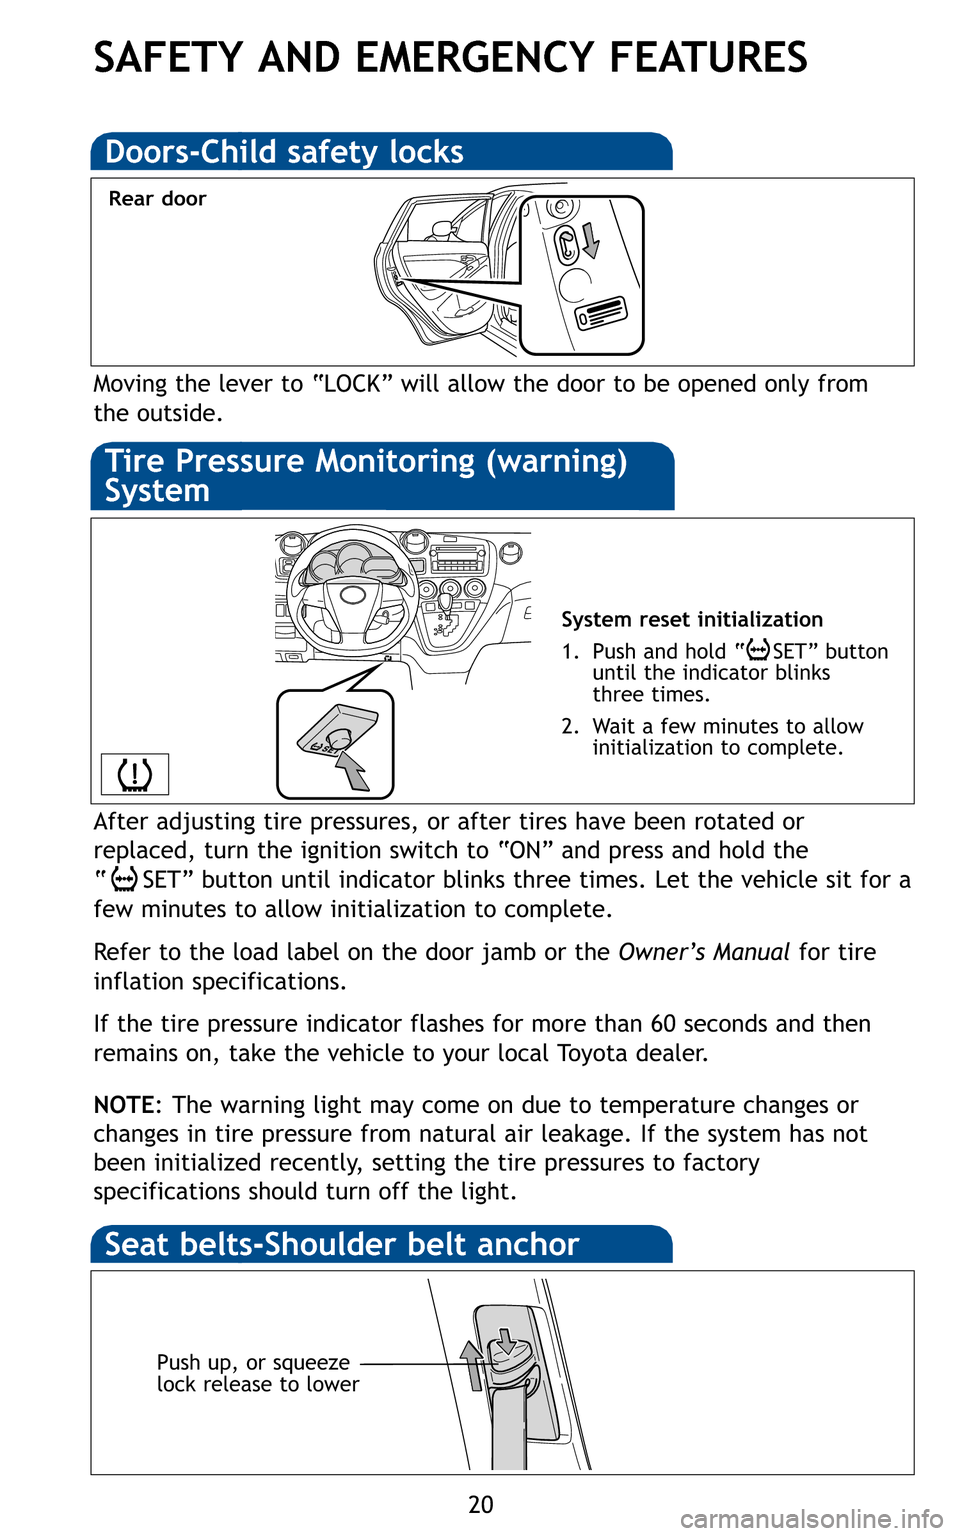 TOYOTA MATRIX 2011 E140 / 2.G Quick Reference Guide 20
Moving the lever to “LOCK” will allow the door to be opened only from 
the outside.
Rear door

System reset initialization 
1. Push and hold “    SET” button  until the indicator blinks 
th